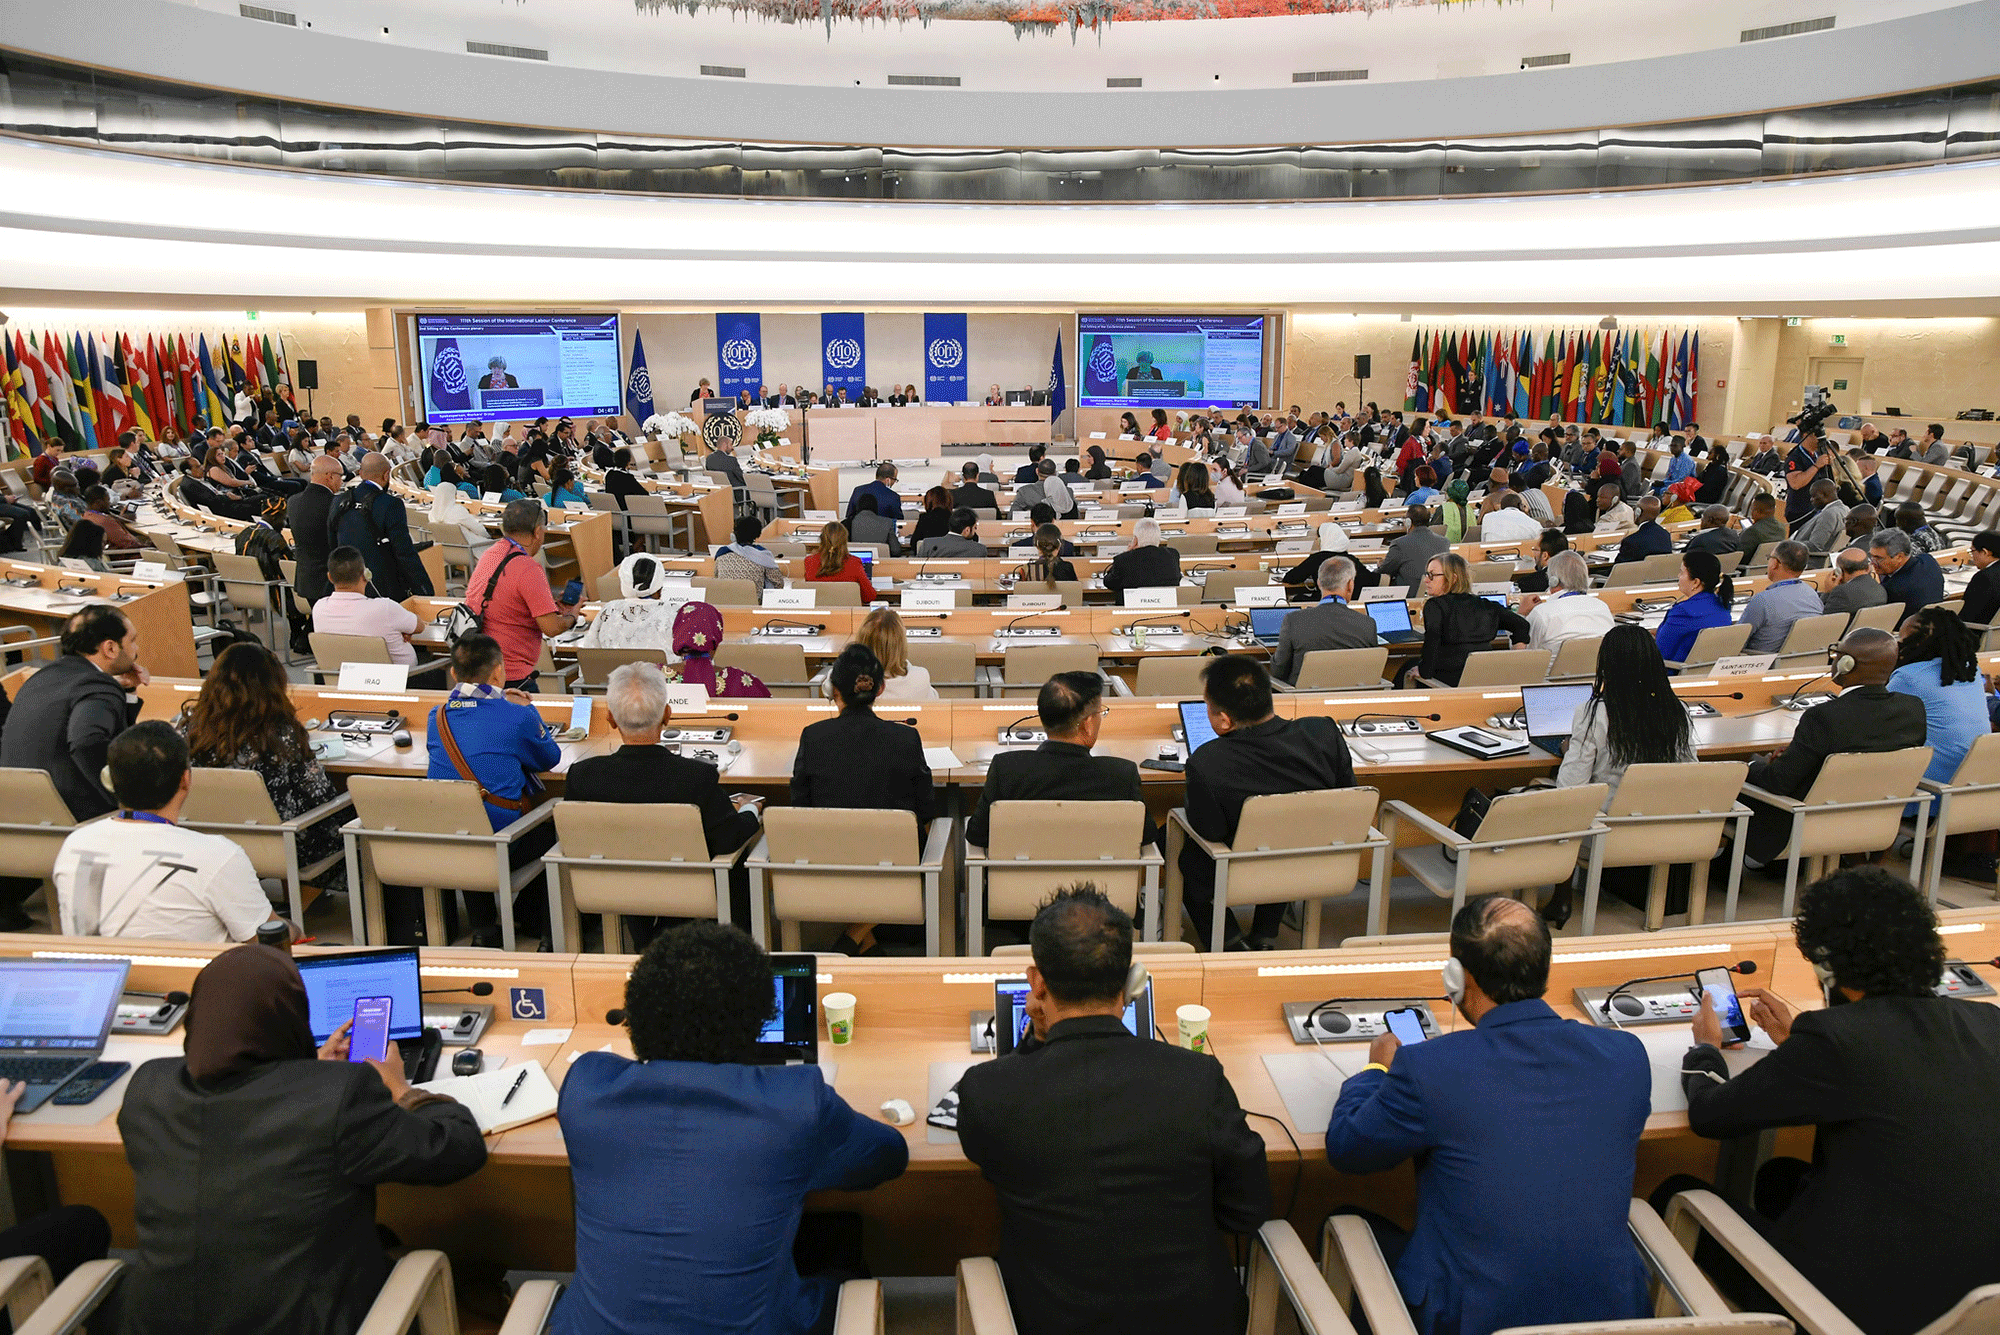 View in conference room of delegates attending Plenary debates at 2023 ILC